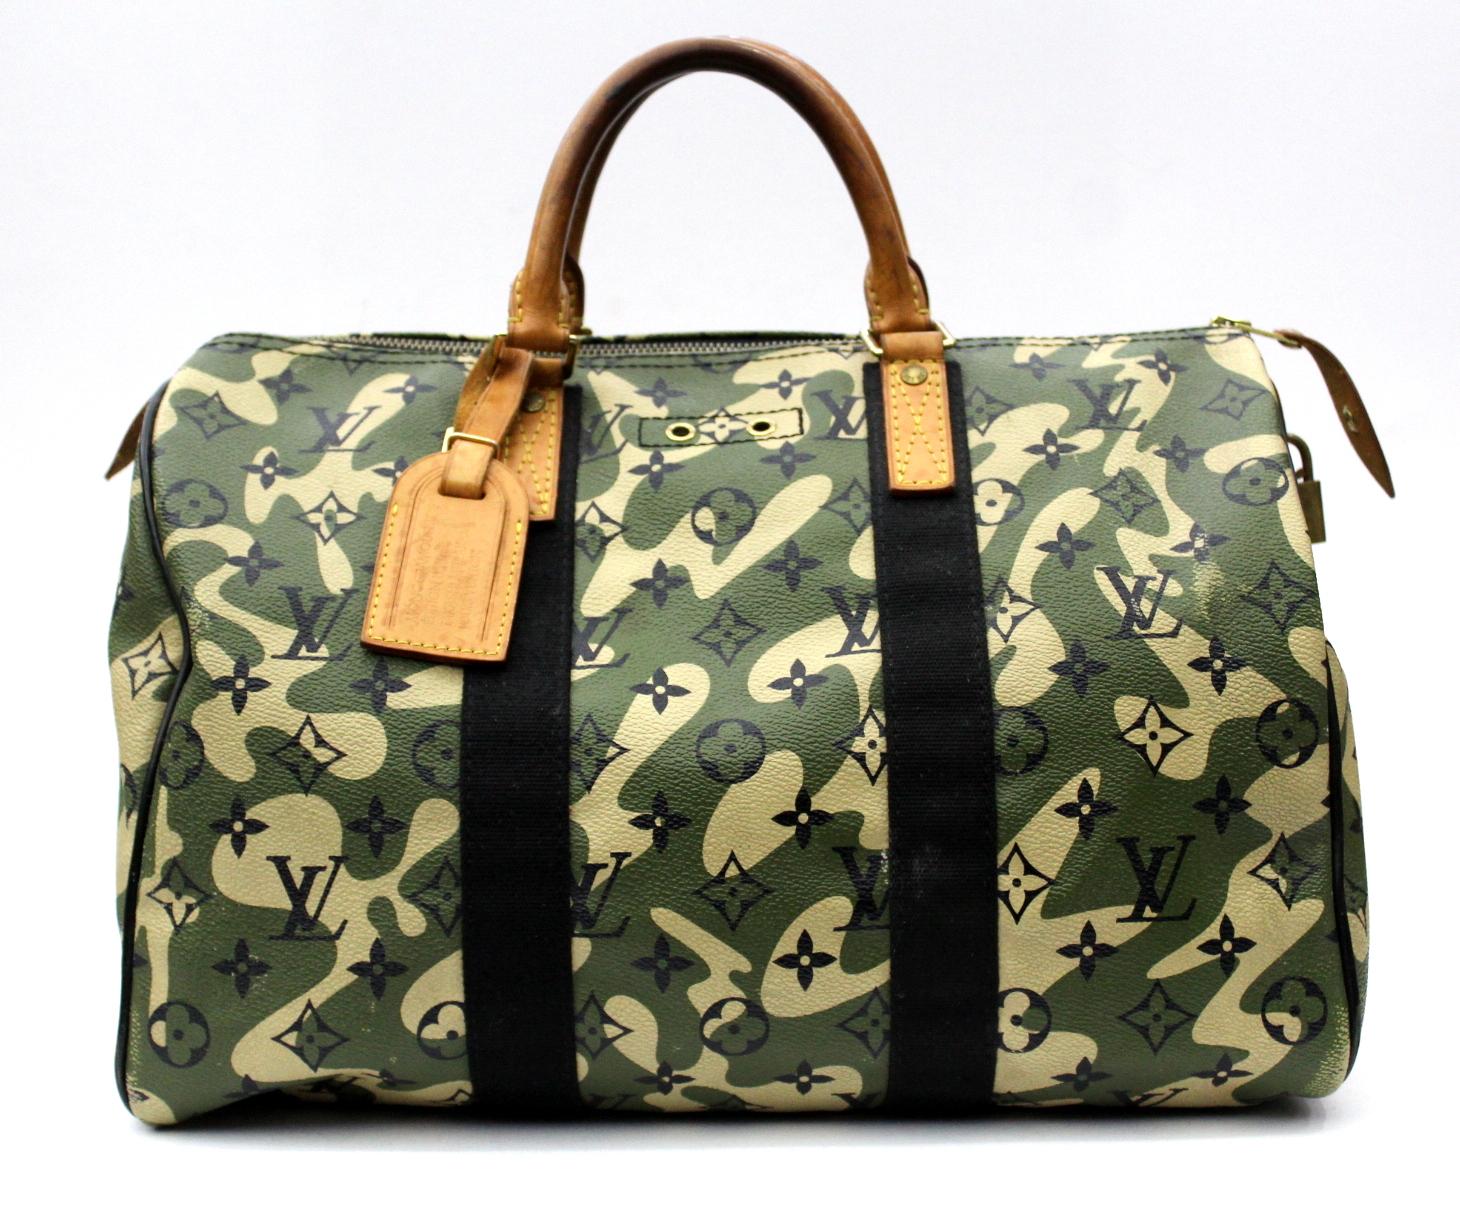 For this urban chic limited edition line, Takashi Murakami and Marc Jacobs re-invented Monogram canvas using the camouflage pattern. Highly sought after by collectors and fashionistas, the famous Monogram print is camouflaged with the classic